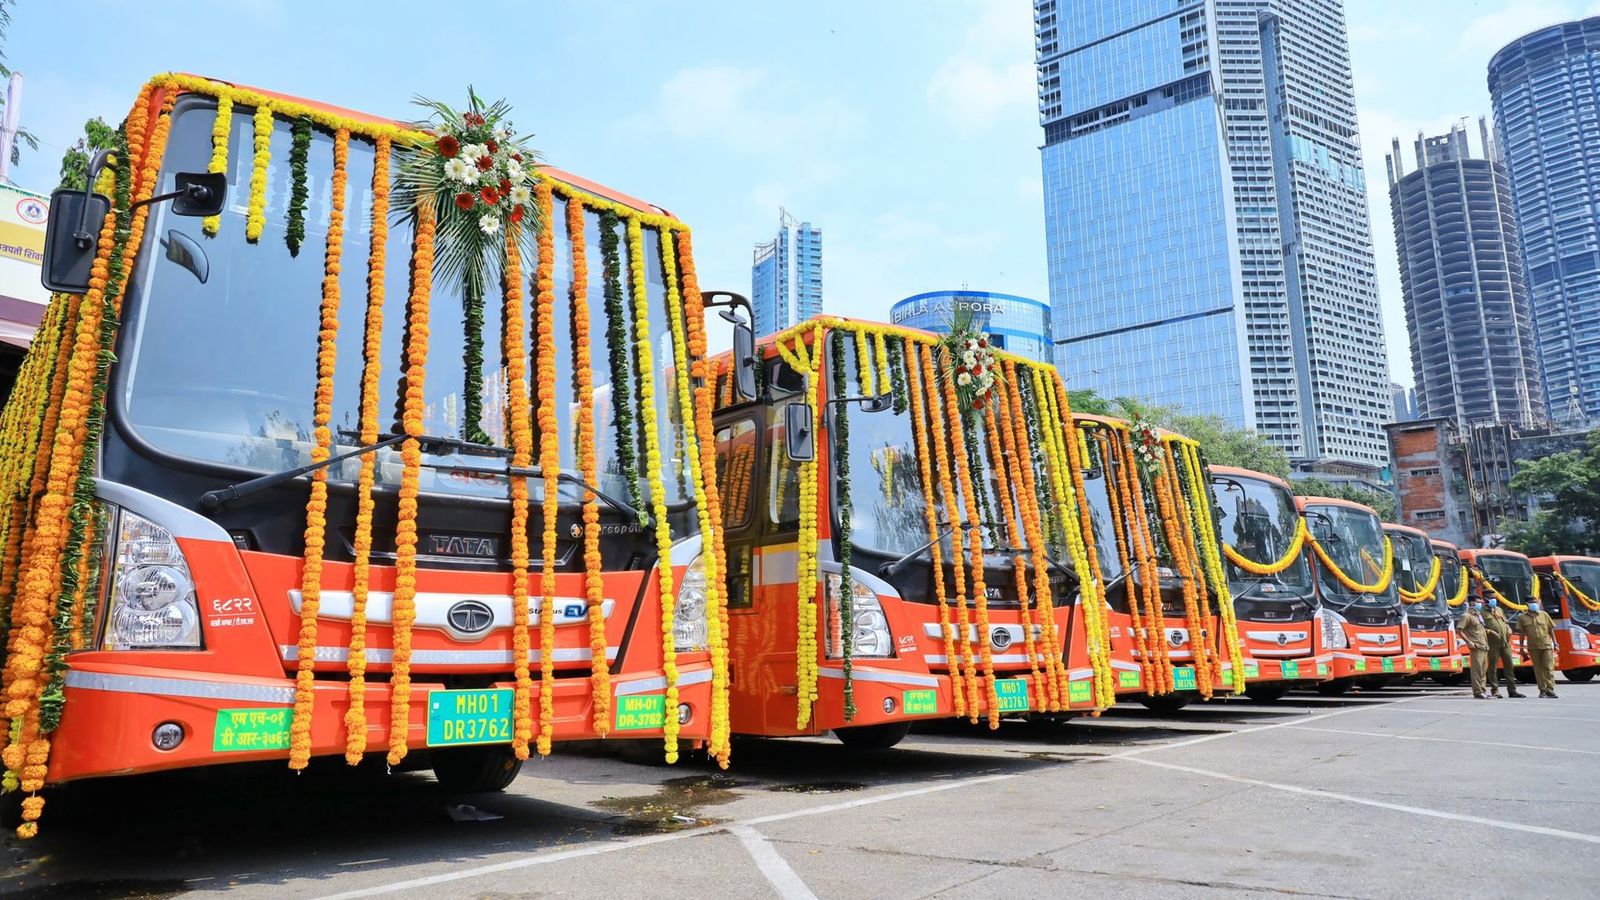 Mumbai's BEST adds 60 more electric buses, target 200 double decker